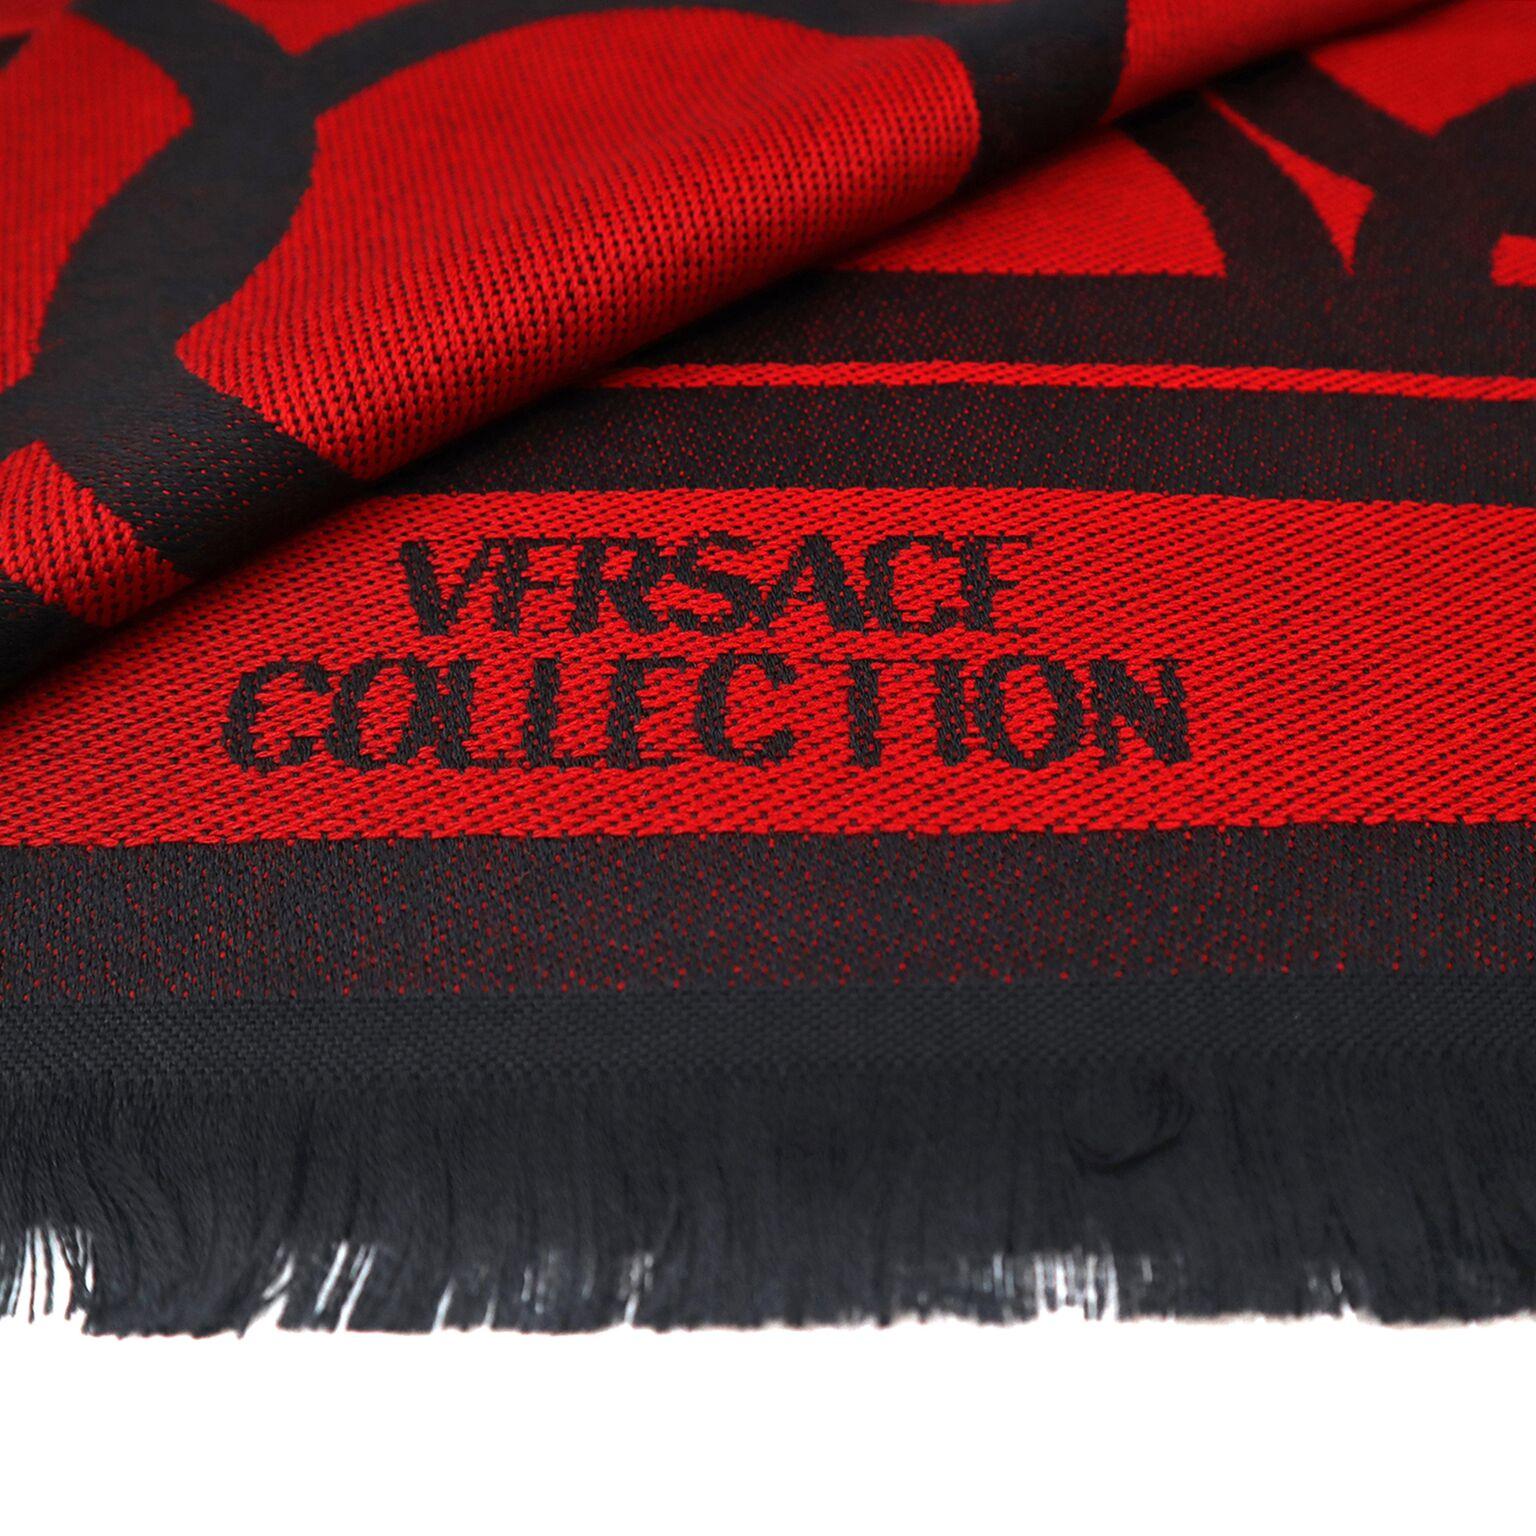 This is a beautiful Versace black & red men's scarf made of 75% Wool 25% Acrylic with Versace Collection logo.
Length -74 Inches and Width -16.5 Inches.
Made in Italy.